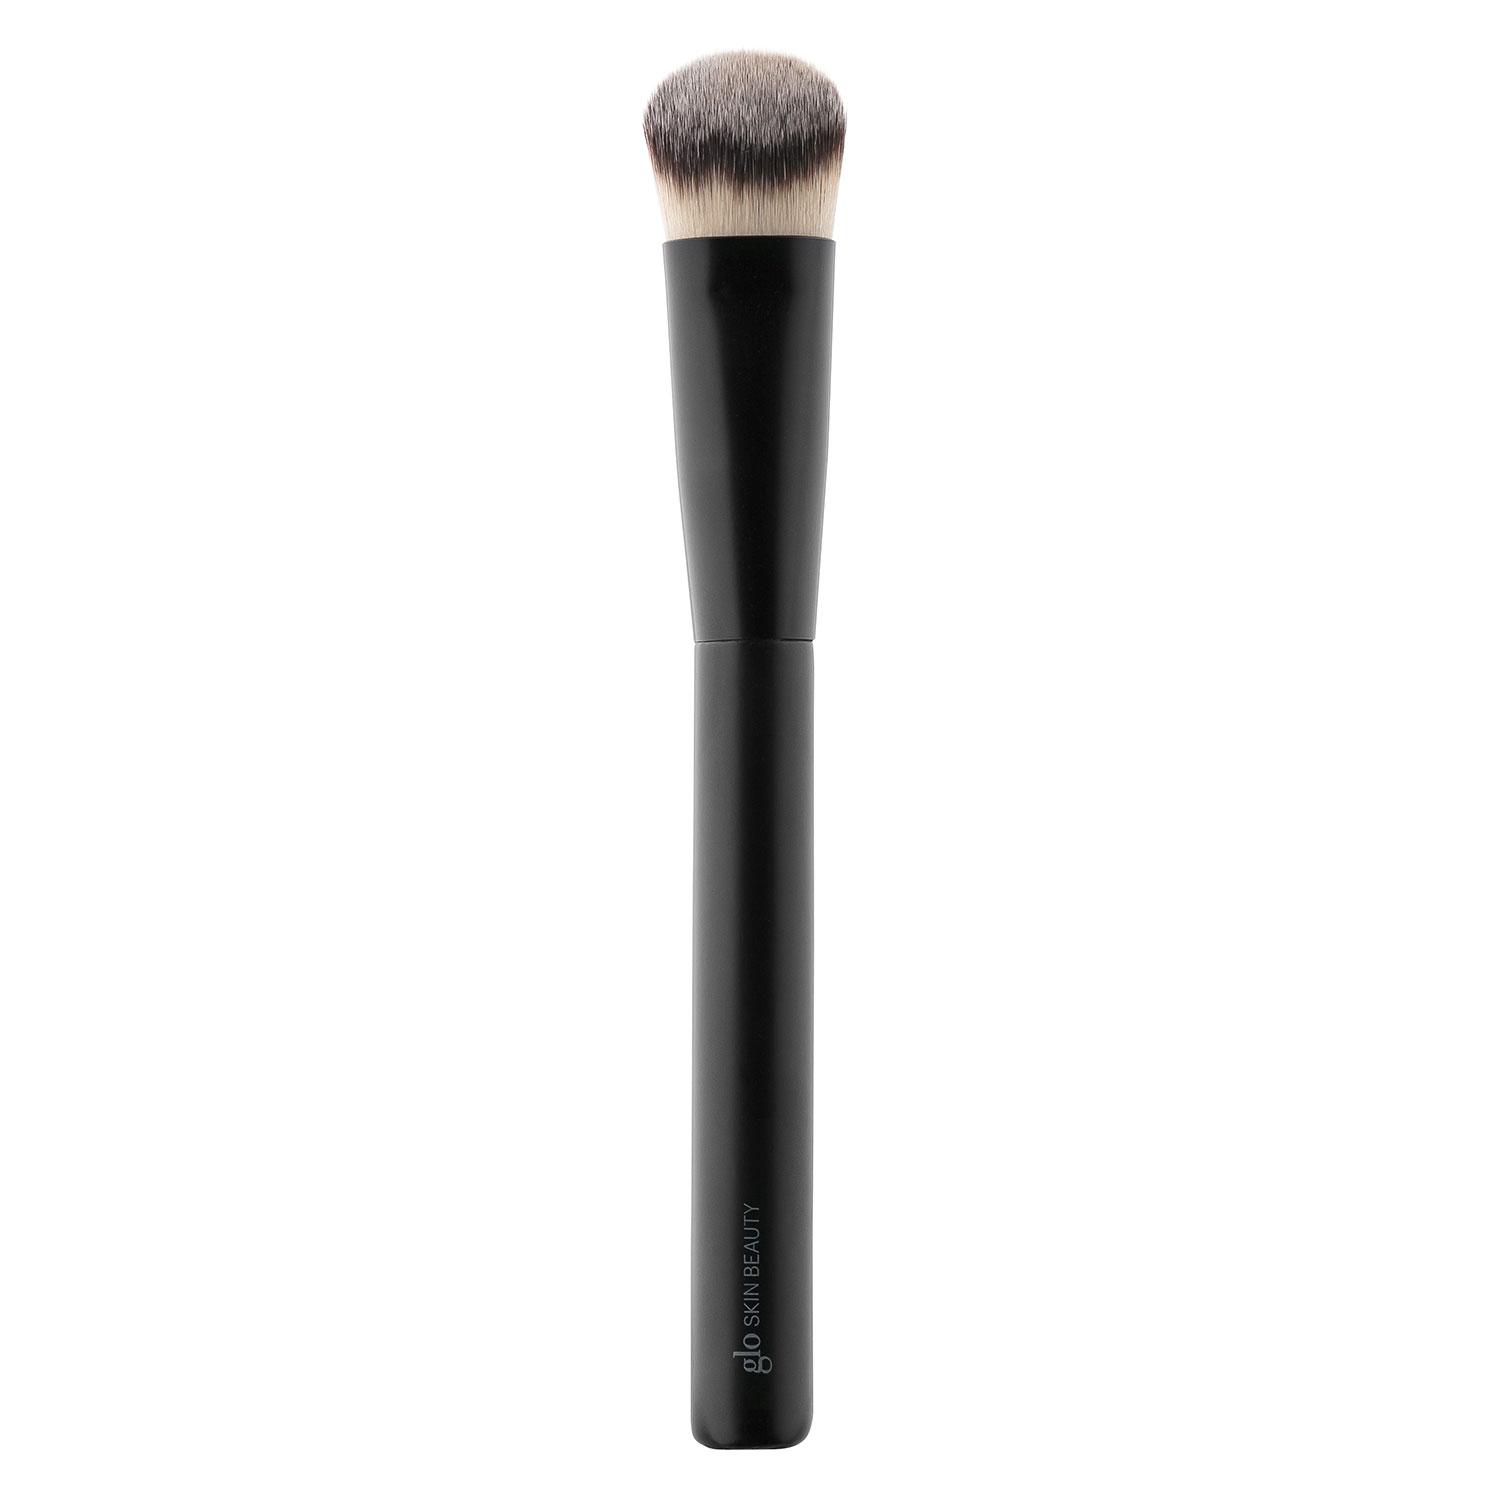 Glo Skin Beauty Tools - Angled Complexion Brush